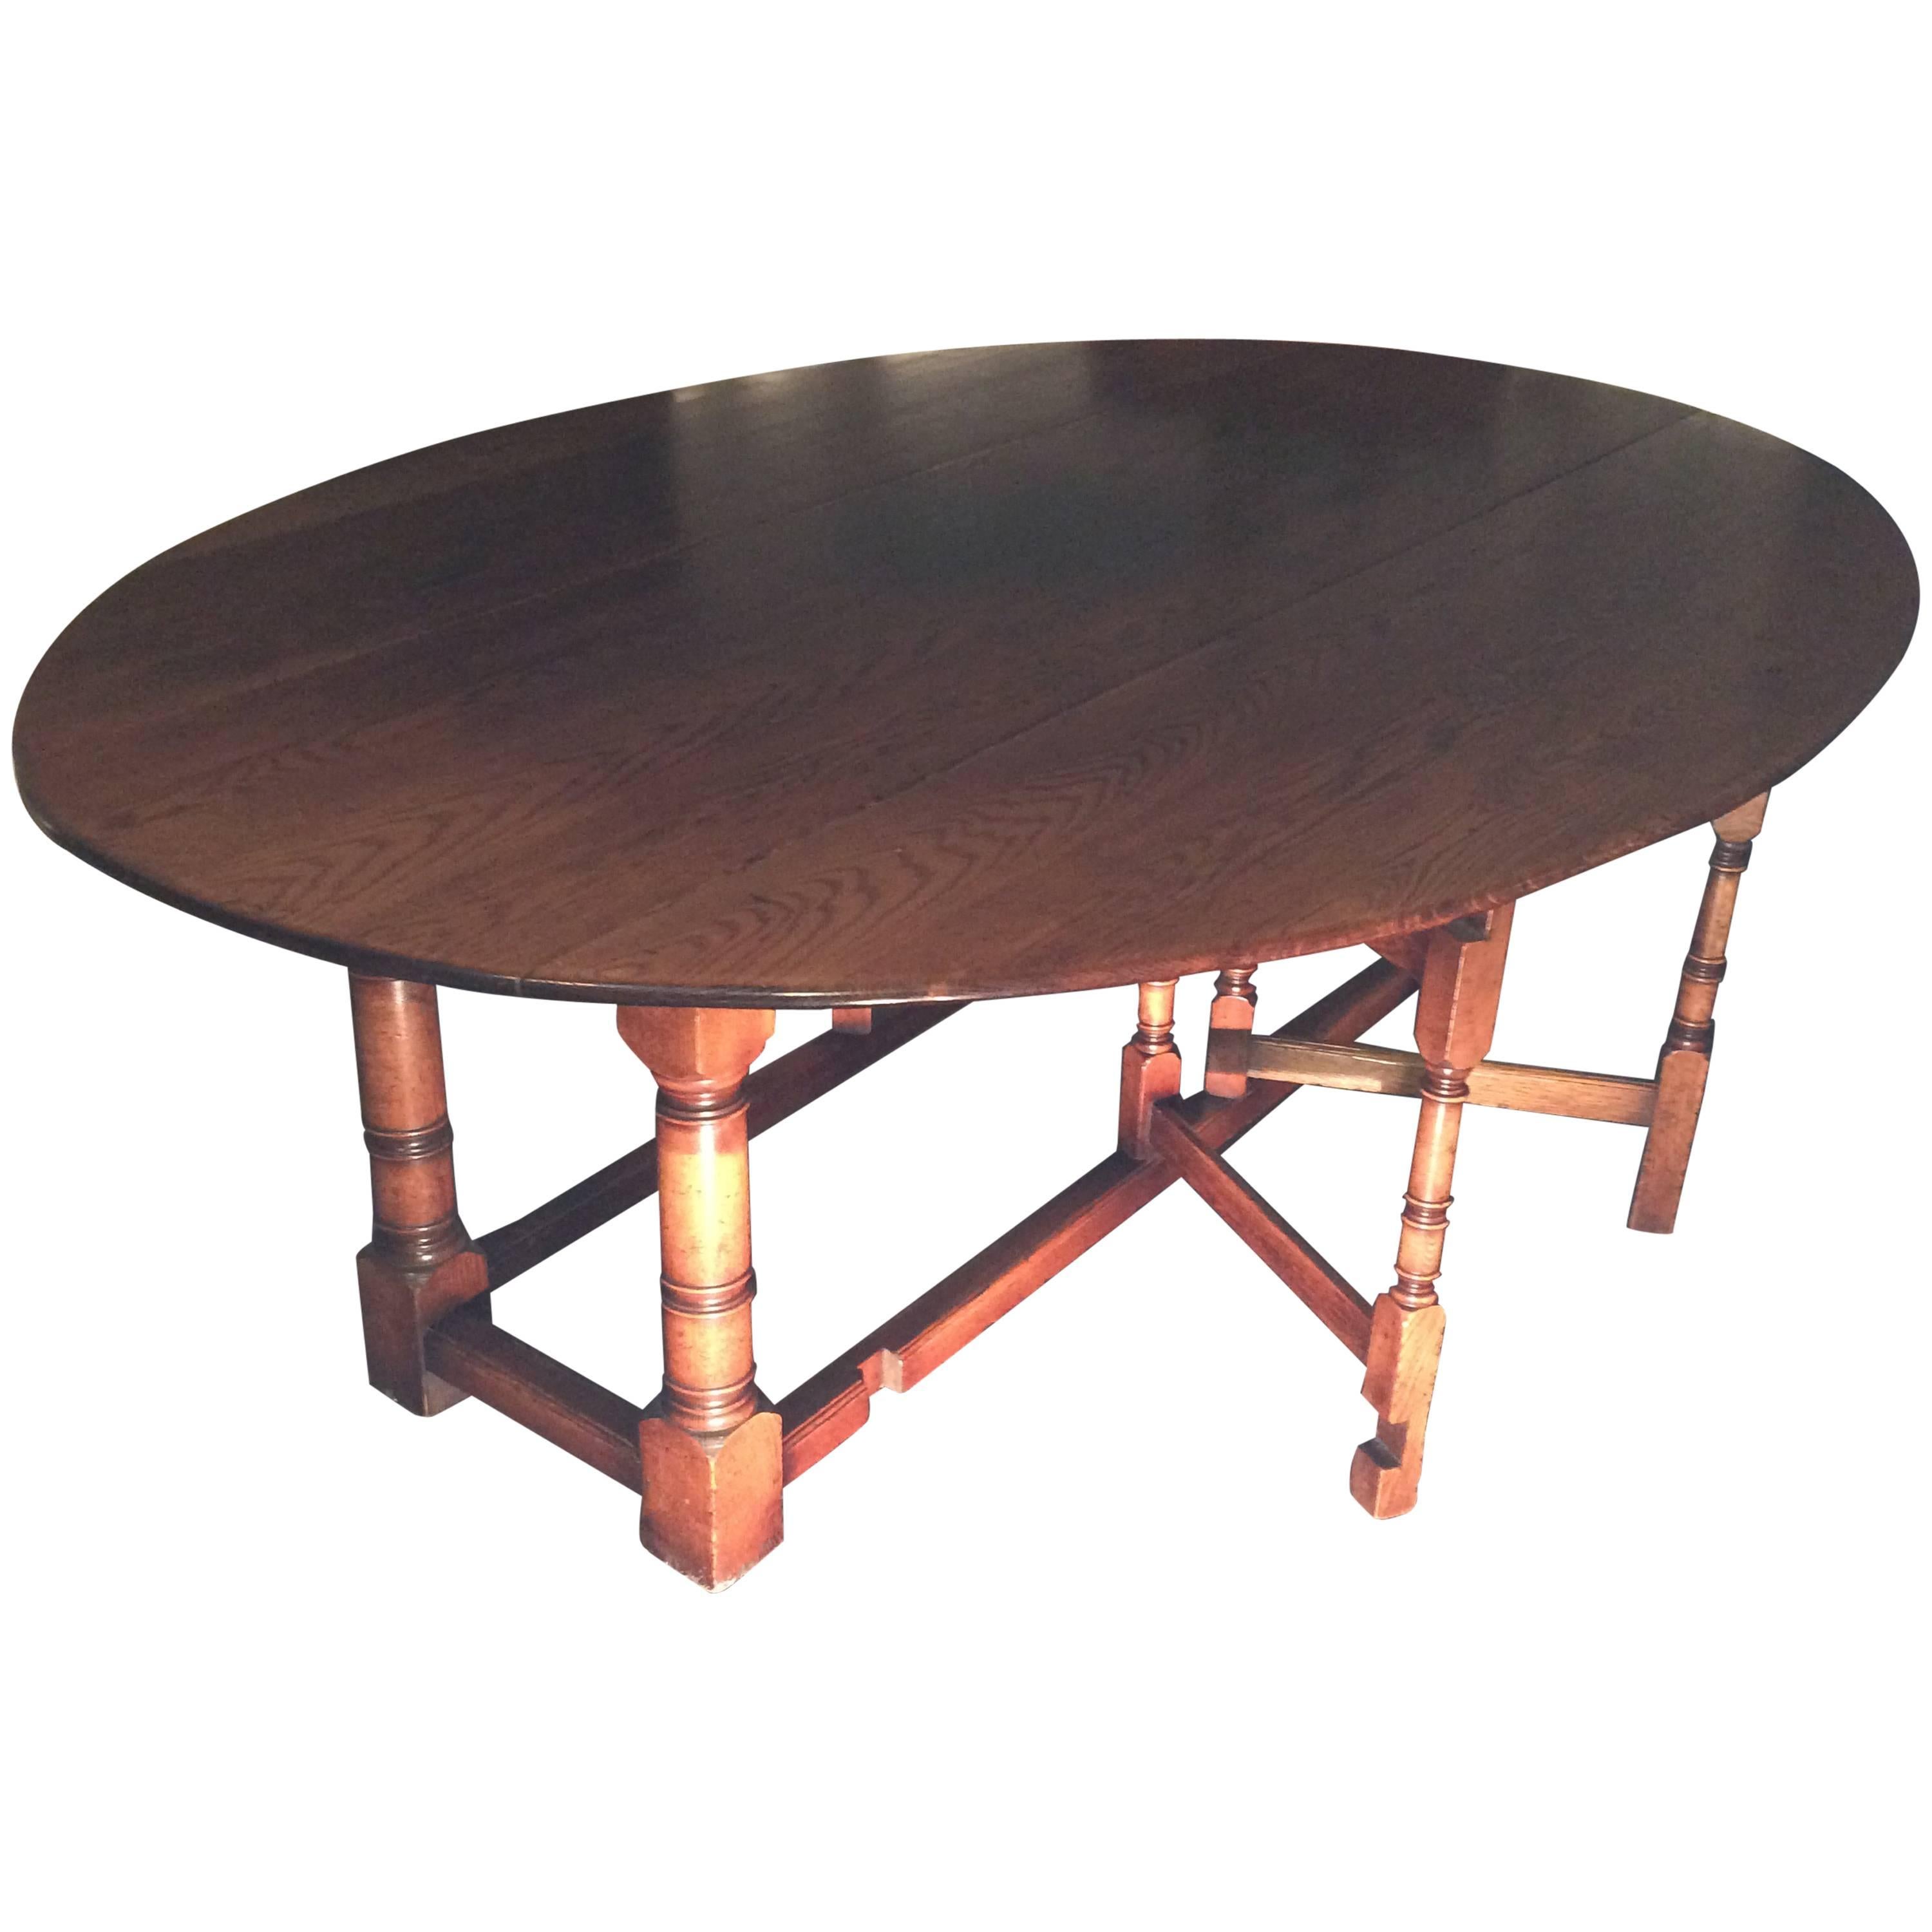 English oak gate leg wake table. Oval in shape when fully extended. Can be used as dining table, sofa table, or console; late 20th century. 

Open: 30